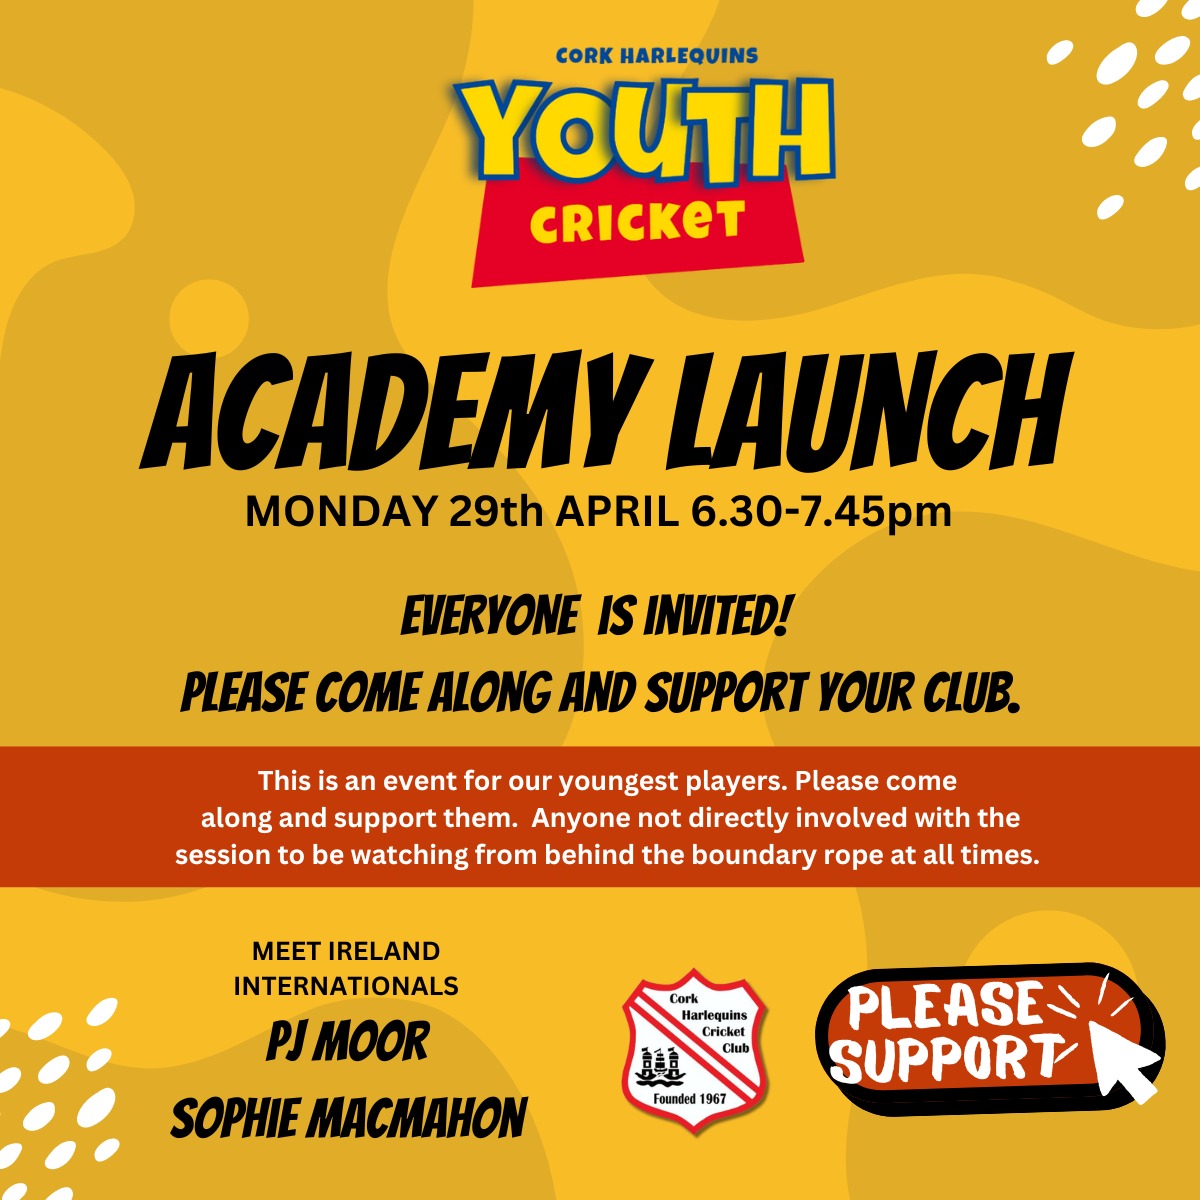 MEET @PJMoor10 & @SophieMacMahon tomorrow at @QuinsCC for our Youth Academy launch. Come and try CRICKET! @BigRedBench @CIParticipation @Cork_Harlequins @CorkSports @CricketBadge @Haganator @harry_tector @IrishWomensCric @MunsterCricket @Siggo @CricketEurope